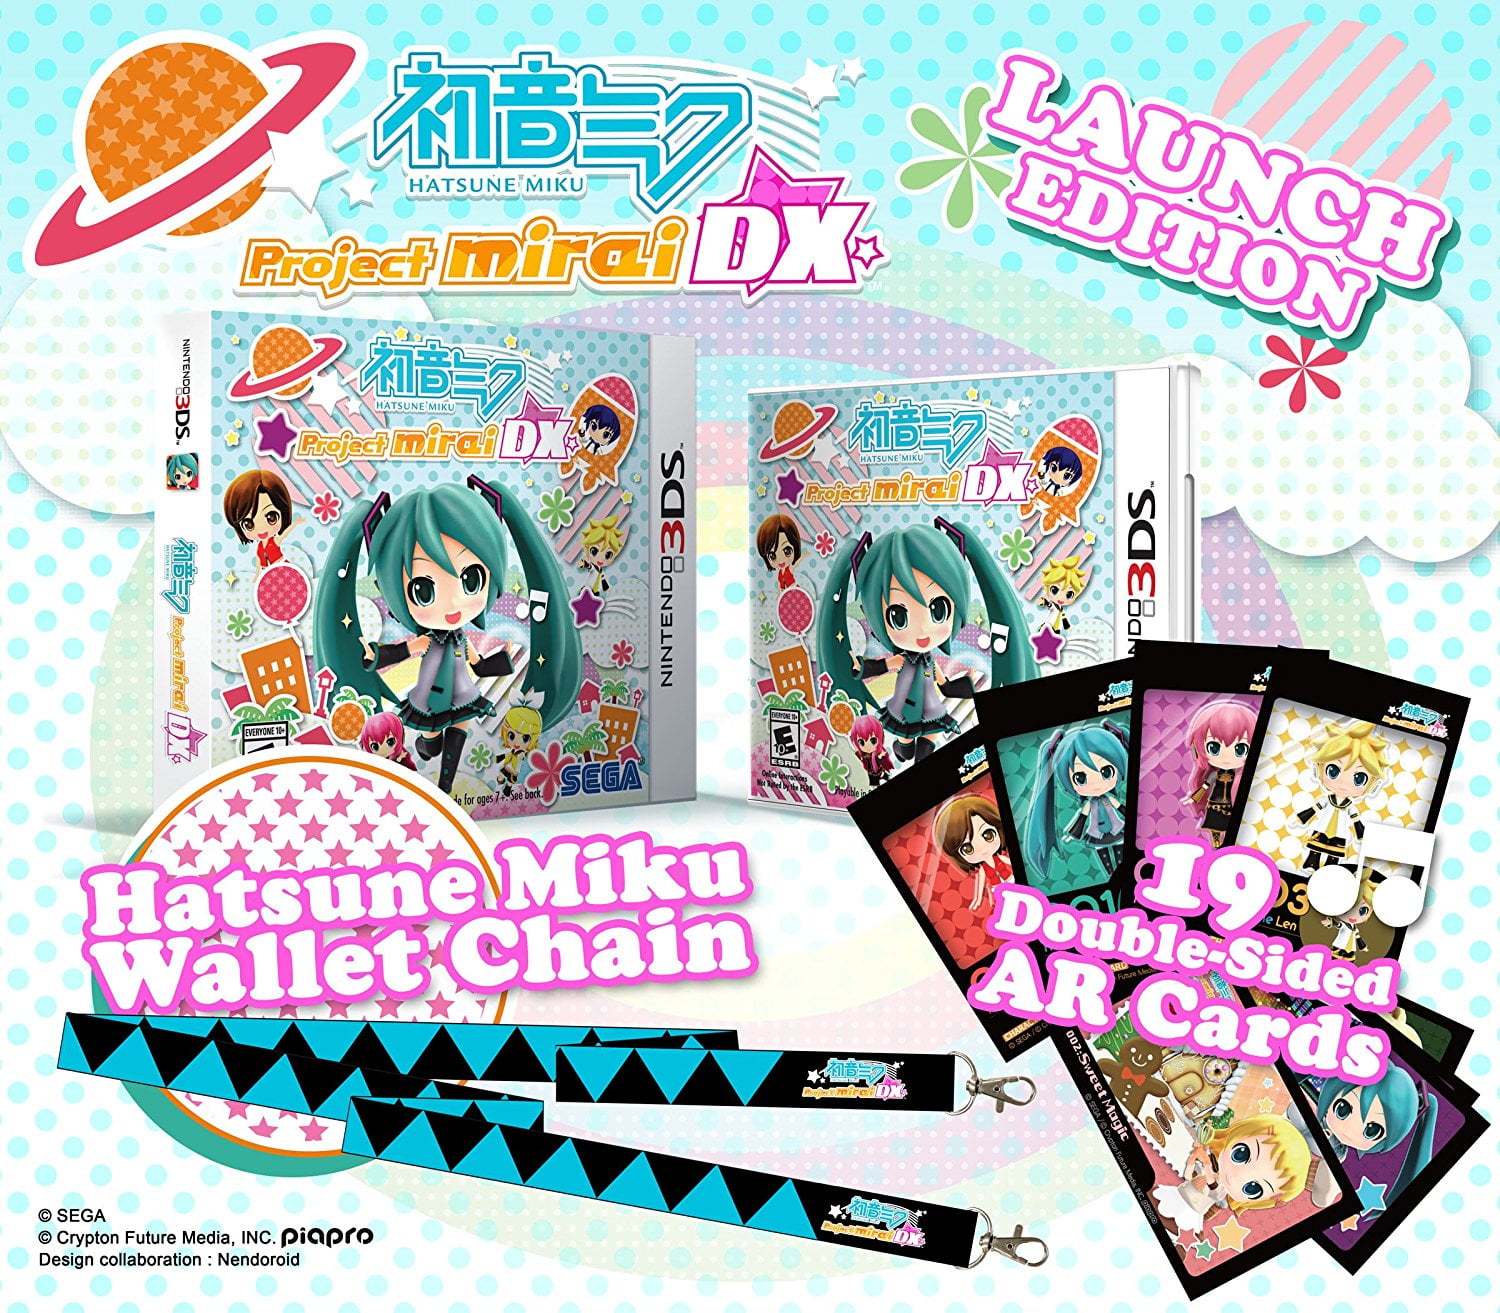 Miku: Project Limited Launch Edition [Nintendo 3DS] -